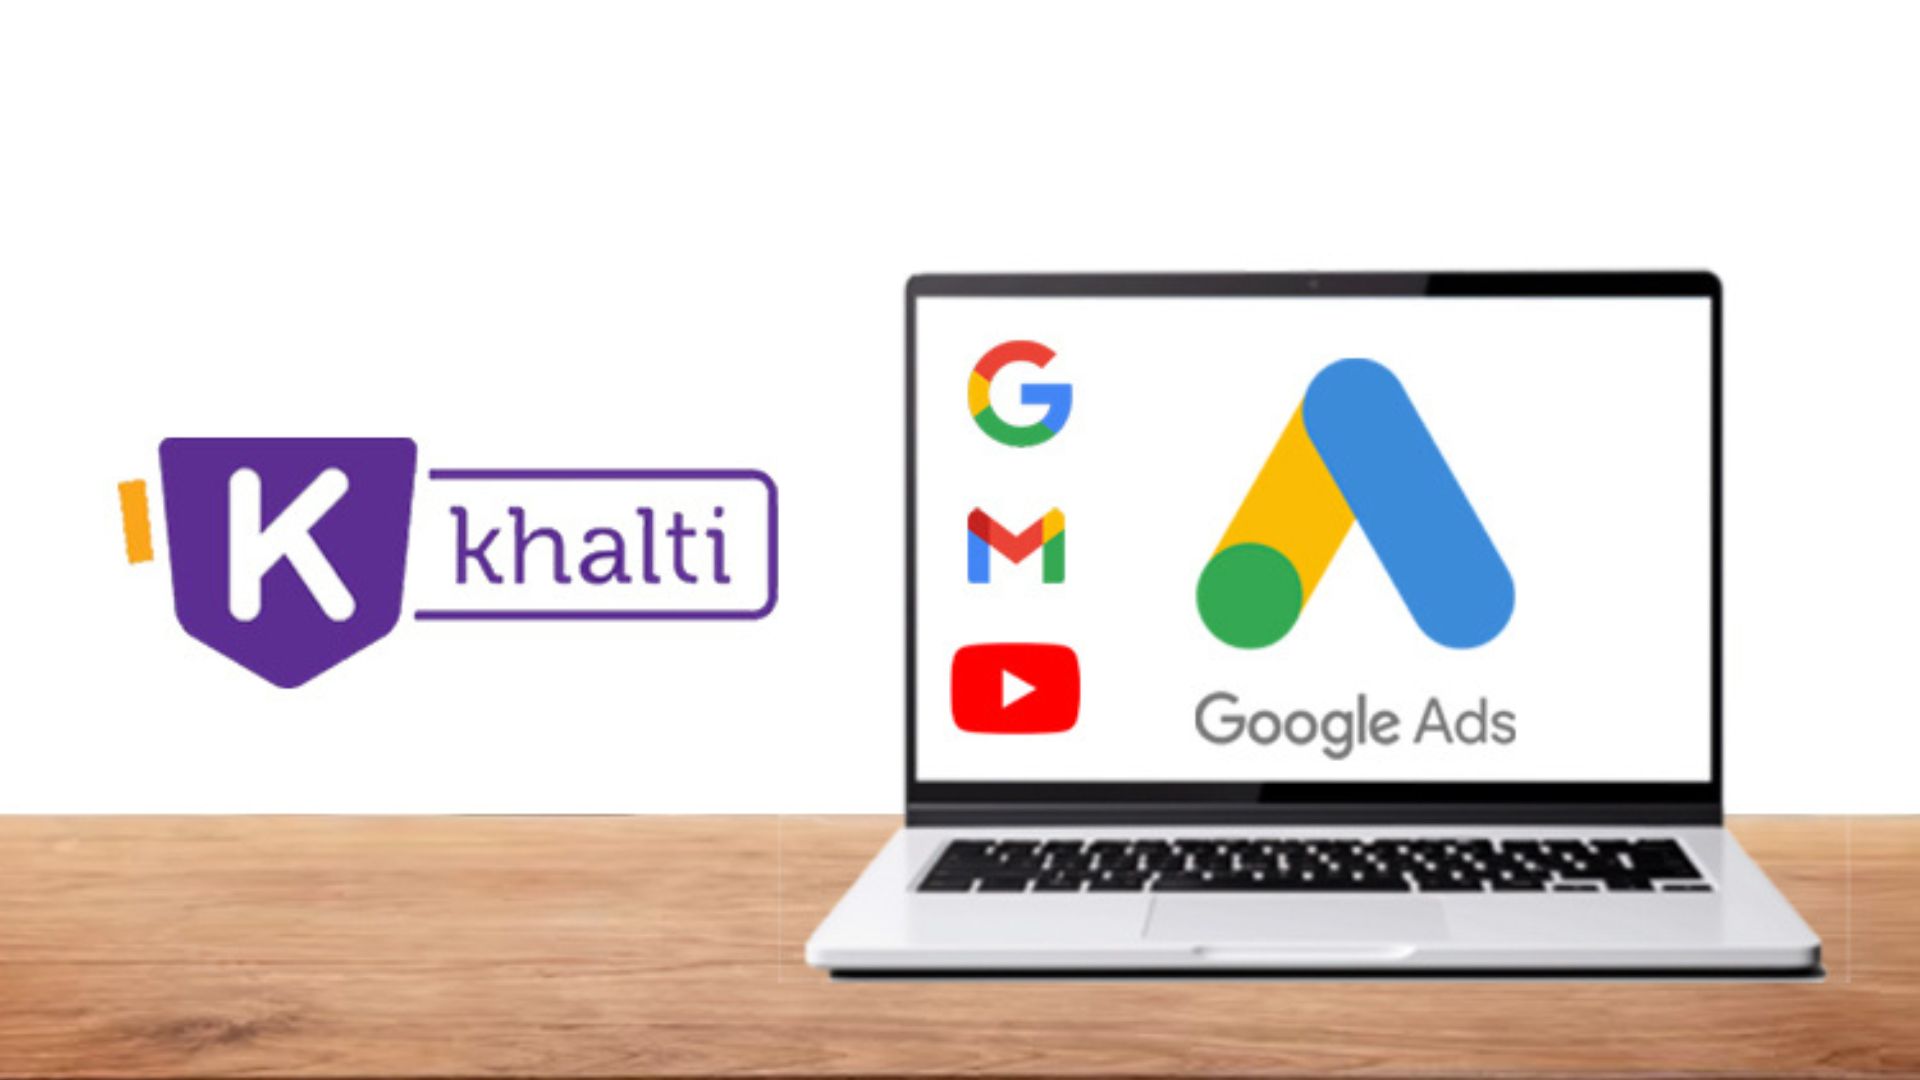 Now Google-YouTube Advertising Credit can be Taken from Khalti Digital Wallet